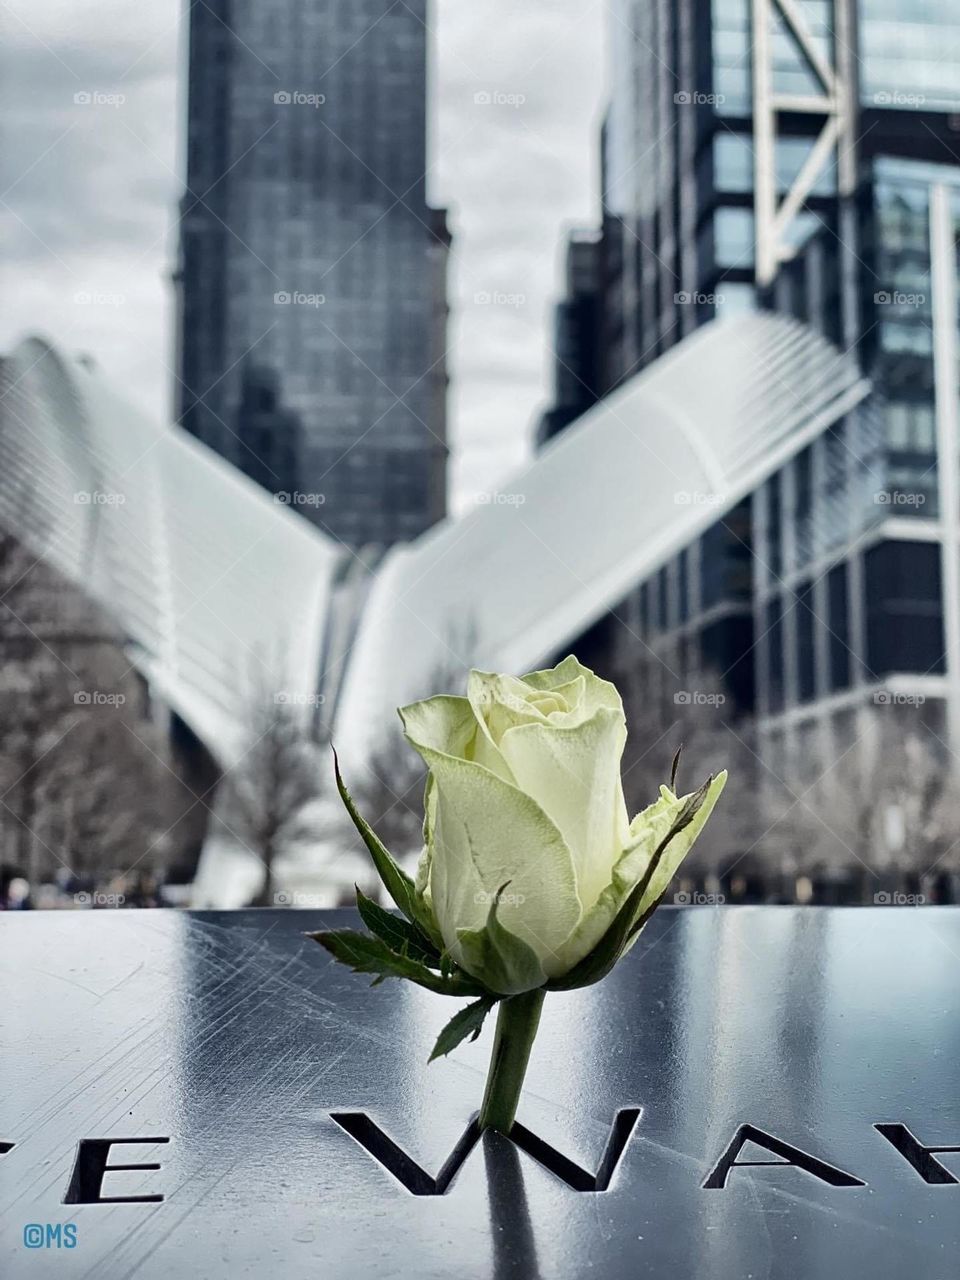 9/11 Memorial in NYC. There are no words to describe the energy I felt around this place. 